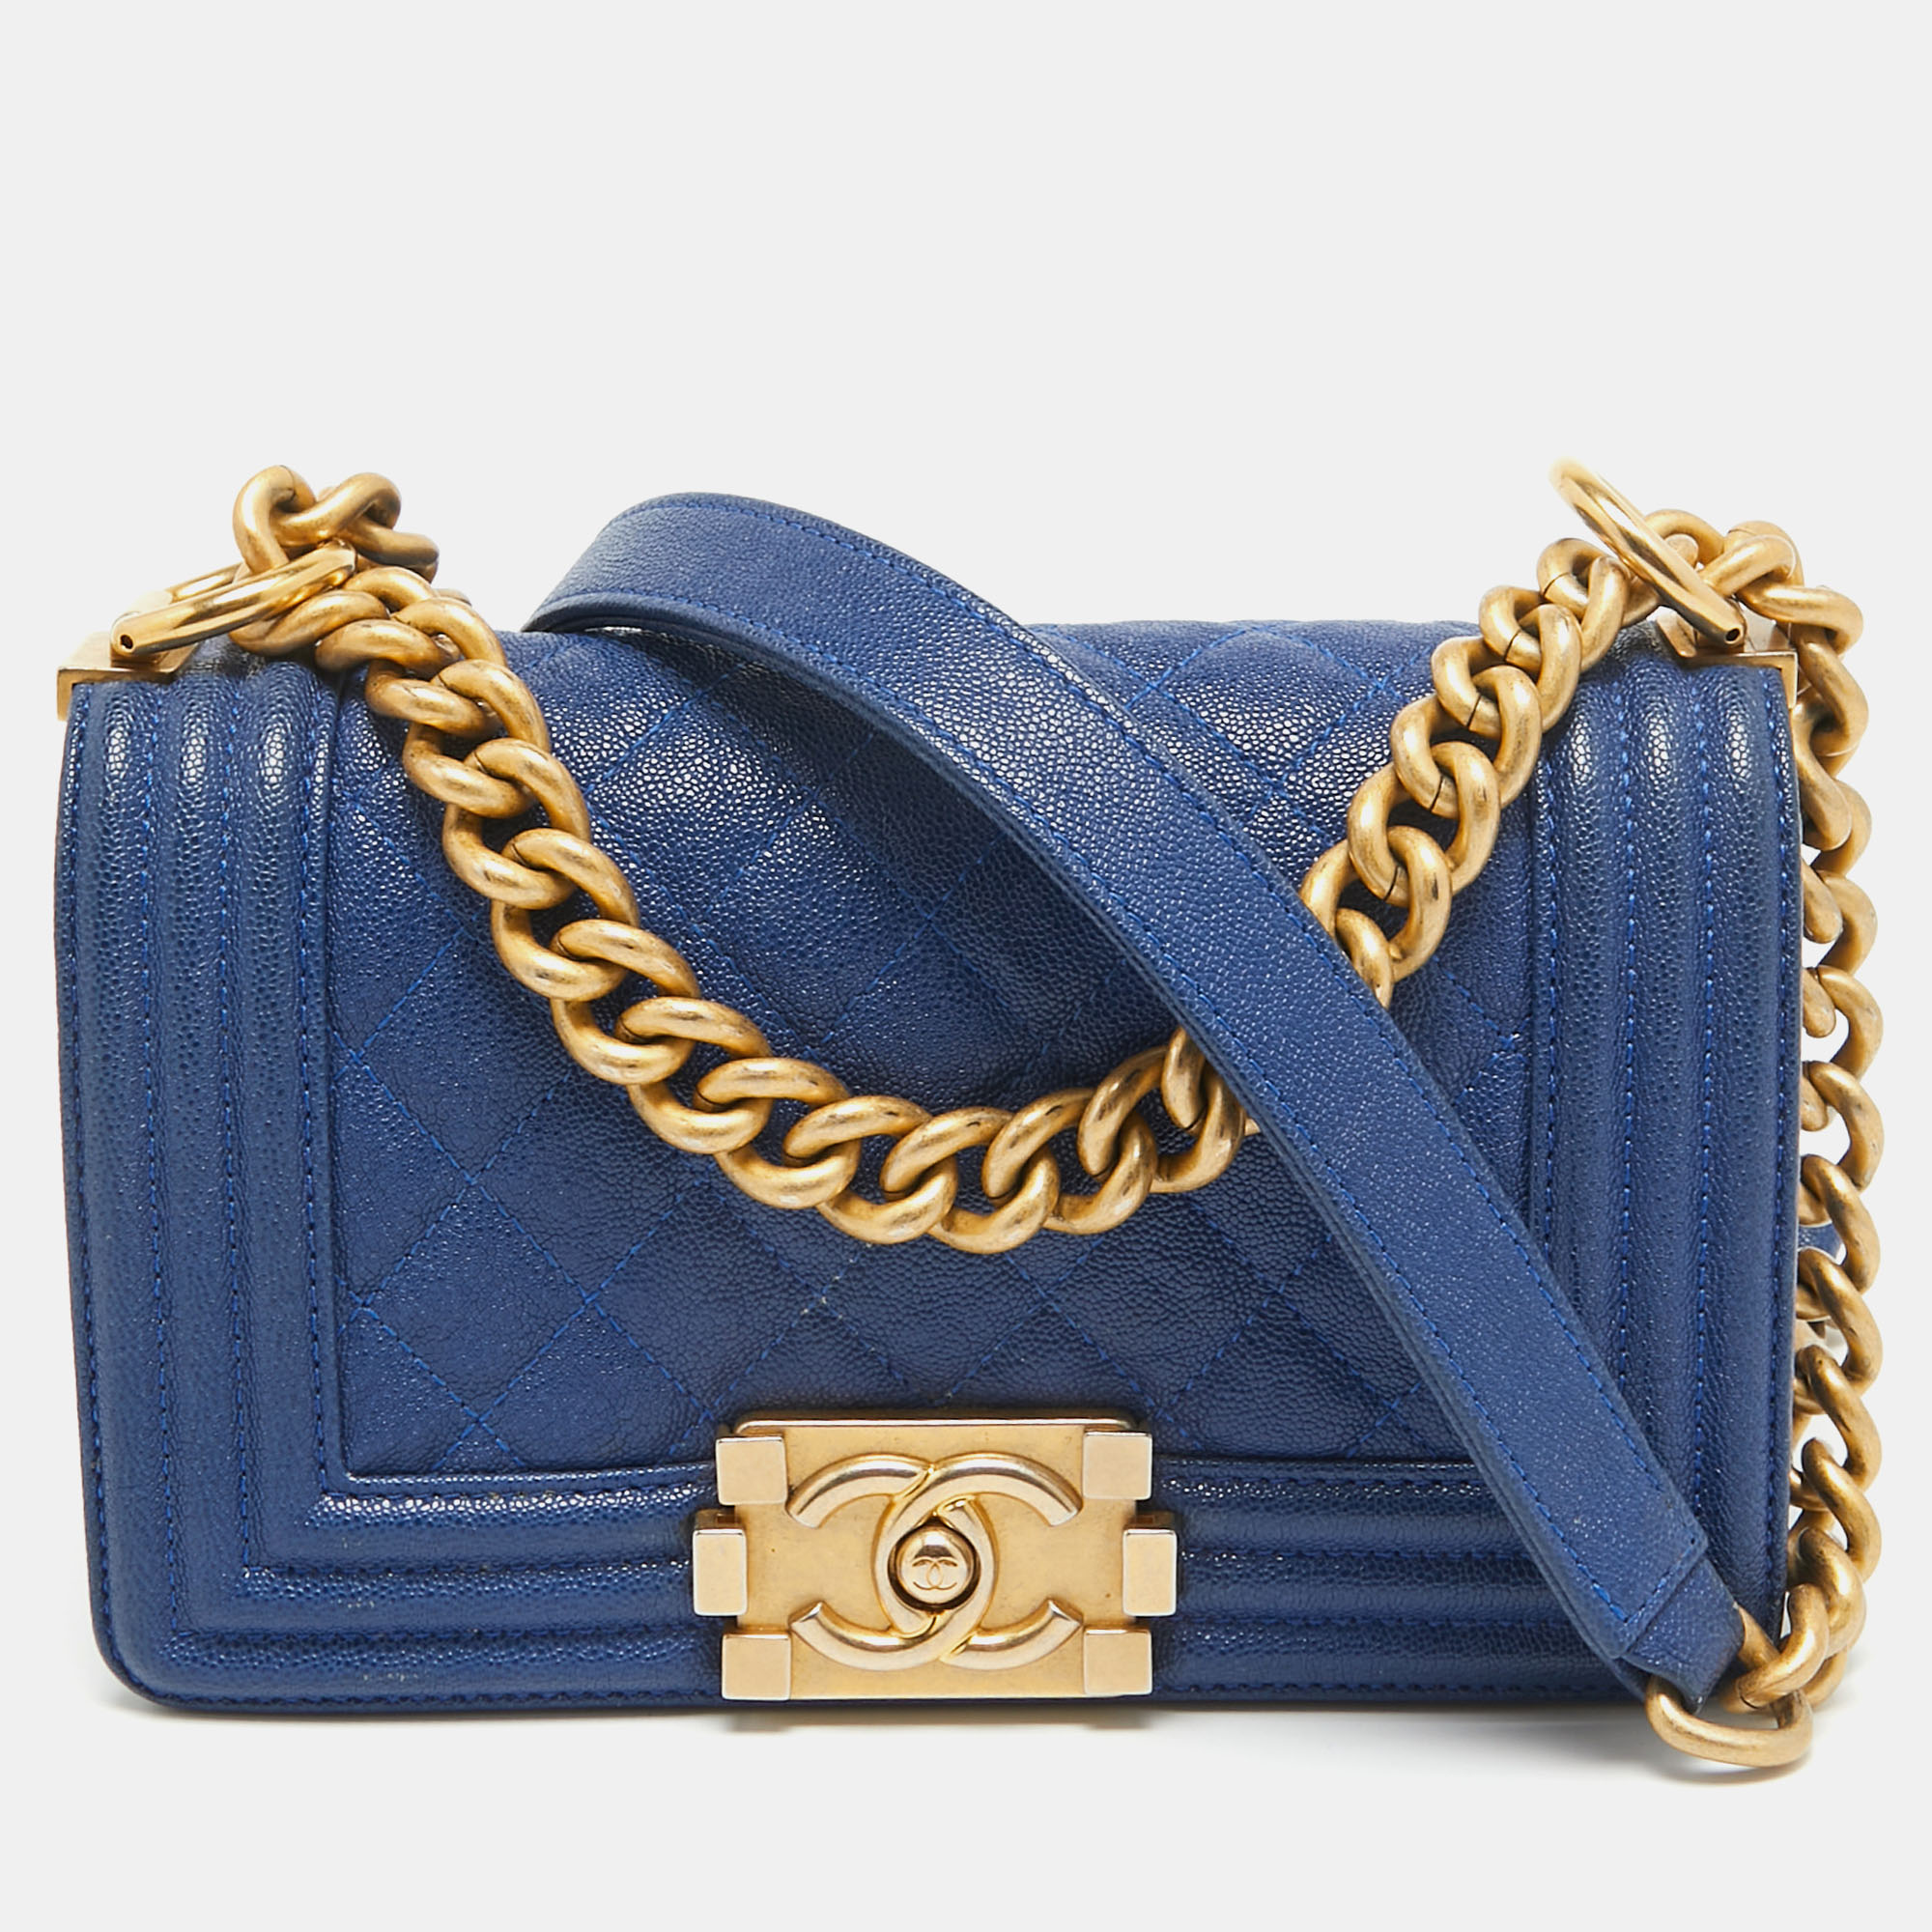 Pre-owned Chanel Navy Blue Leather Mini Boy Bag